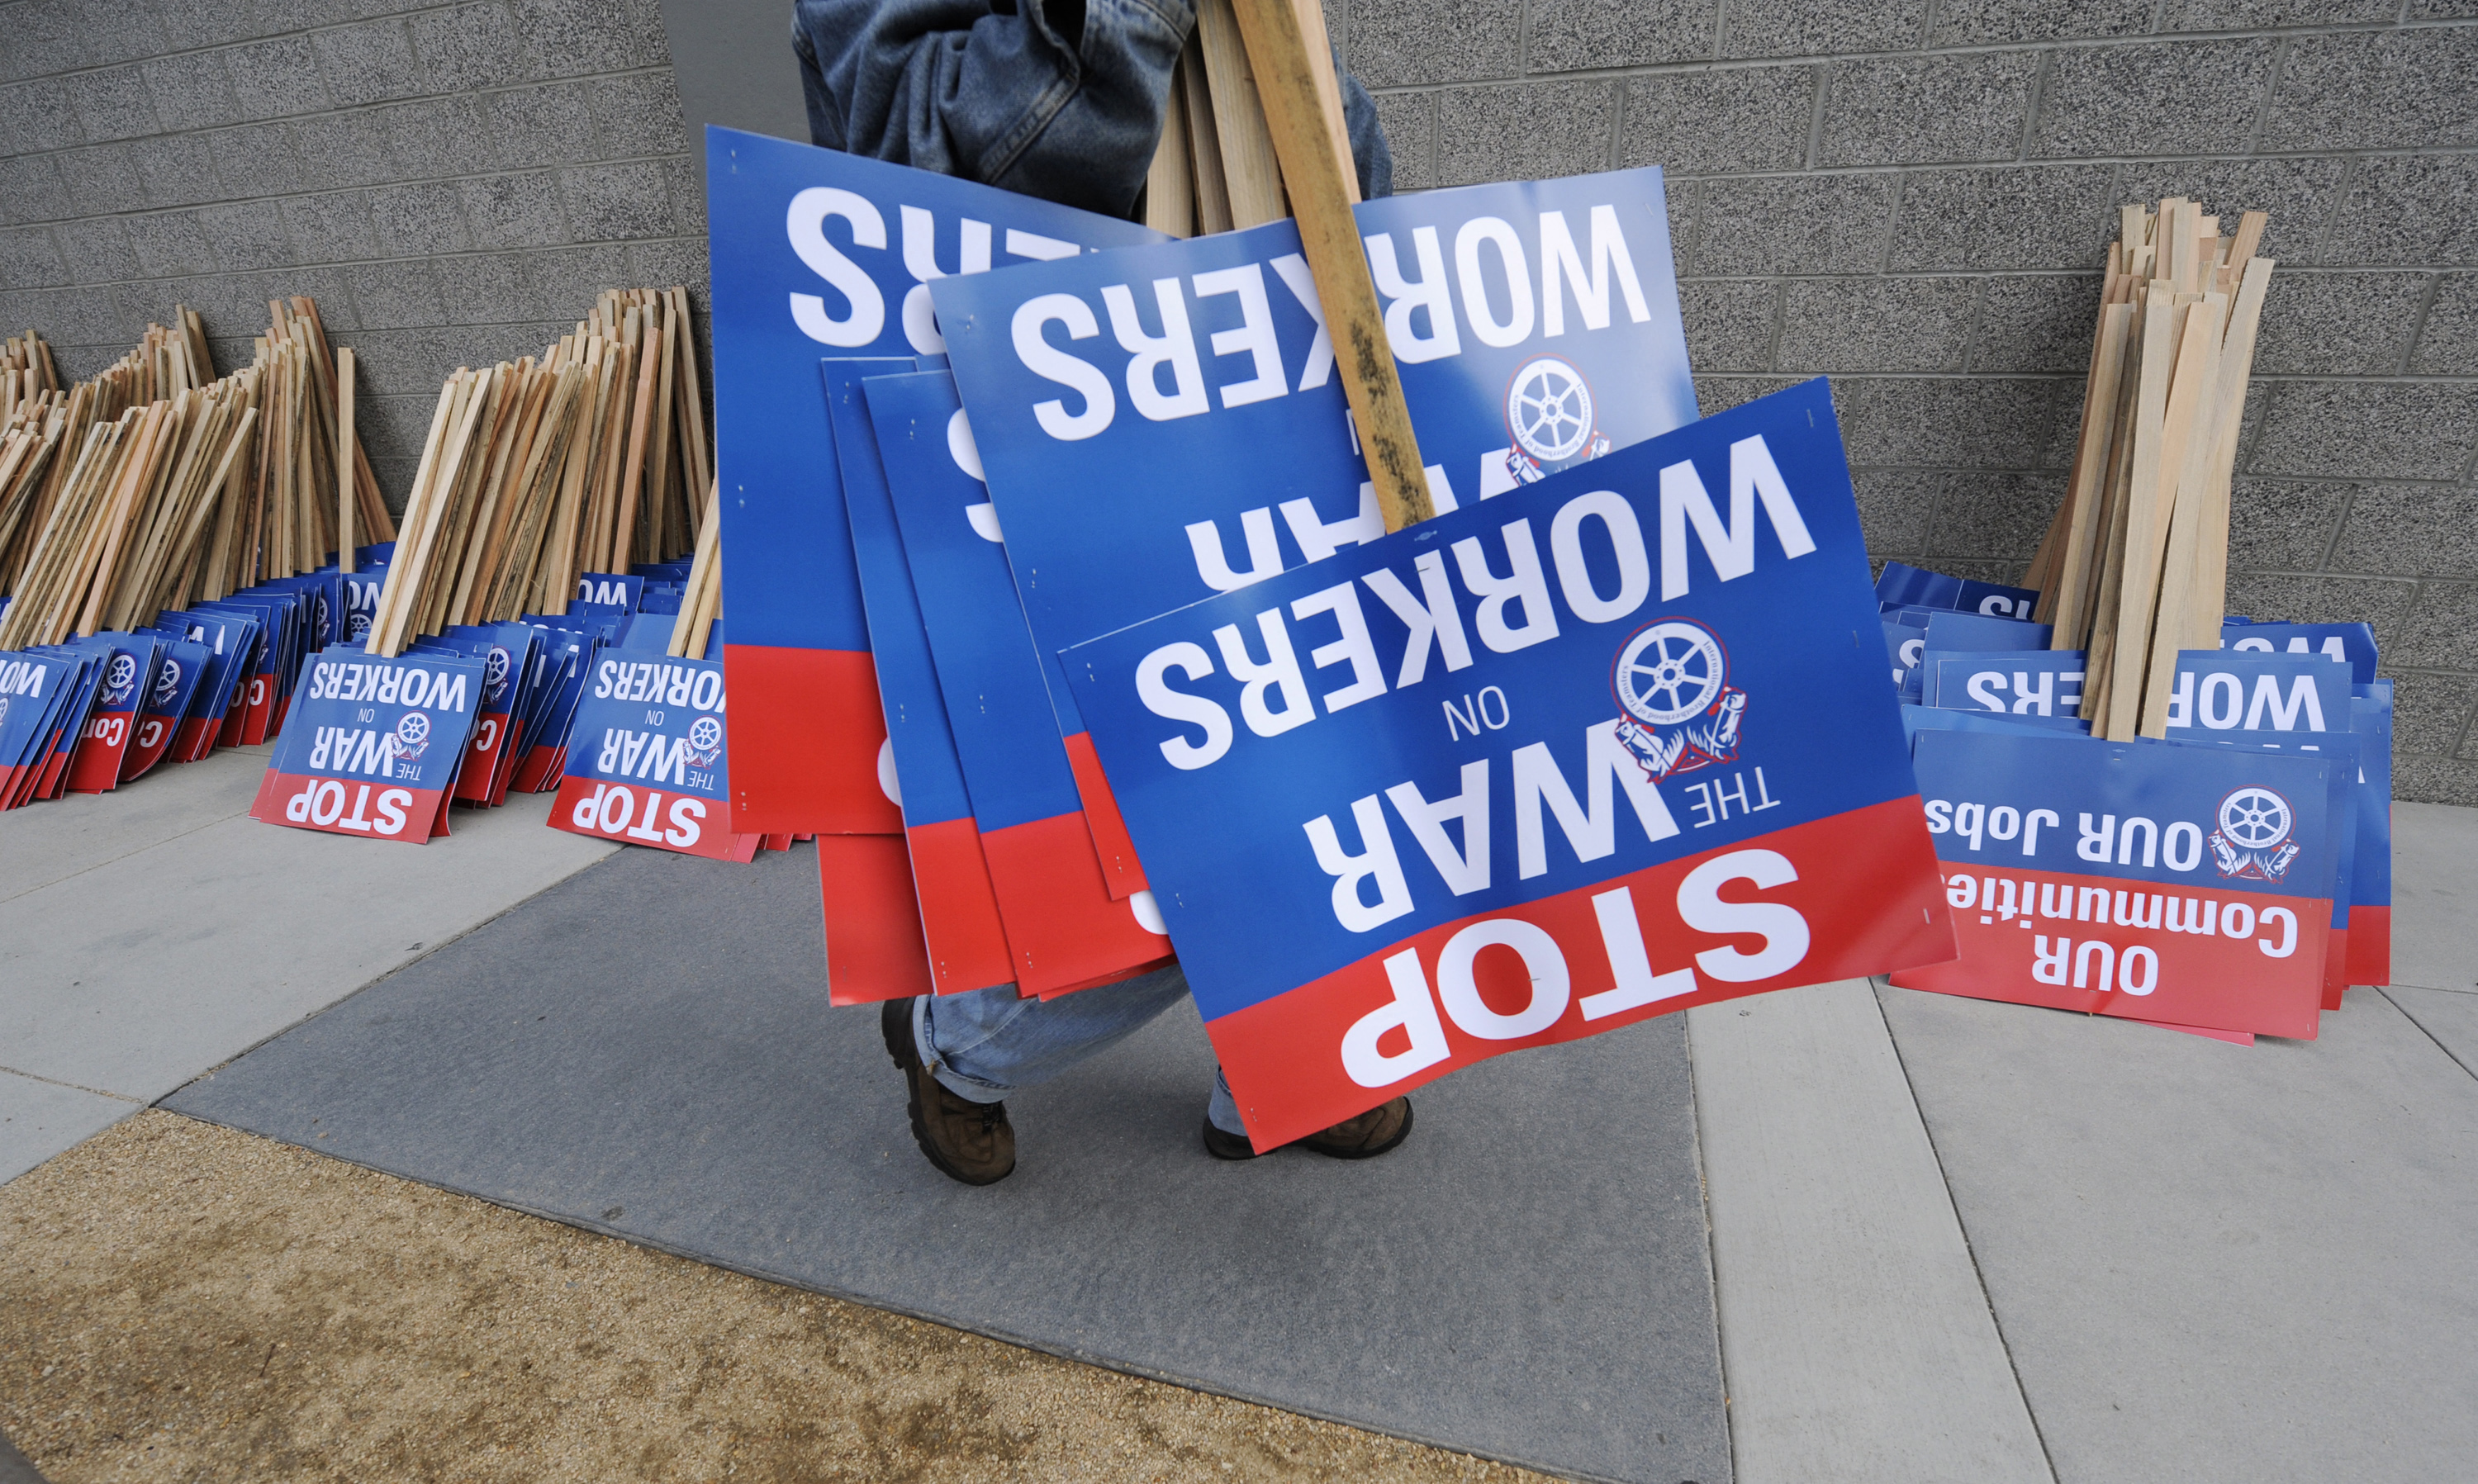 Participants distribute signs during a march and rally by labor union supporters in Los Angeles